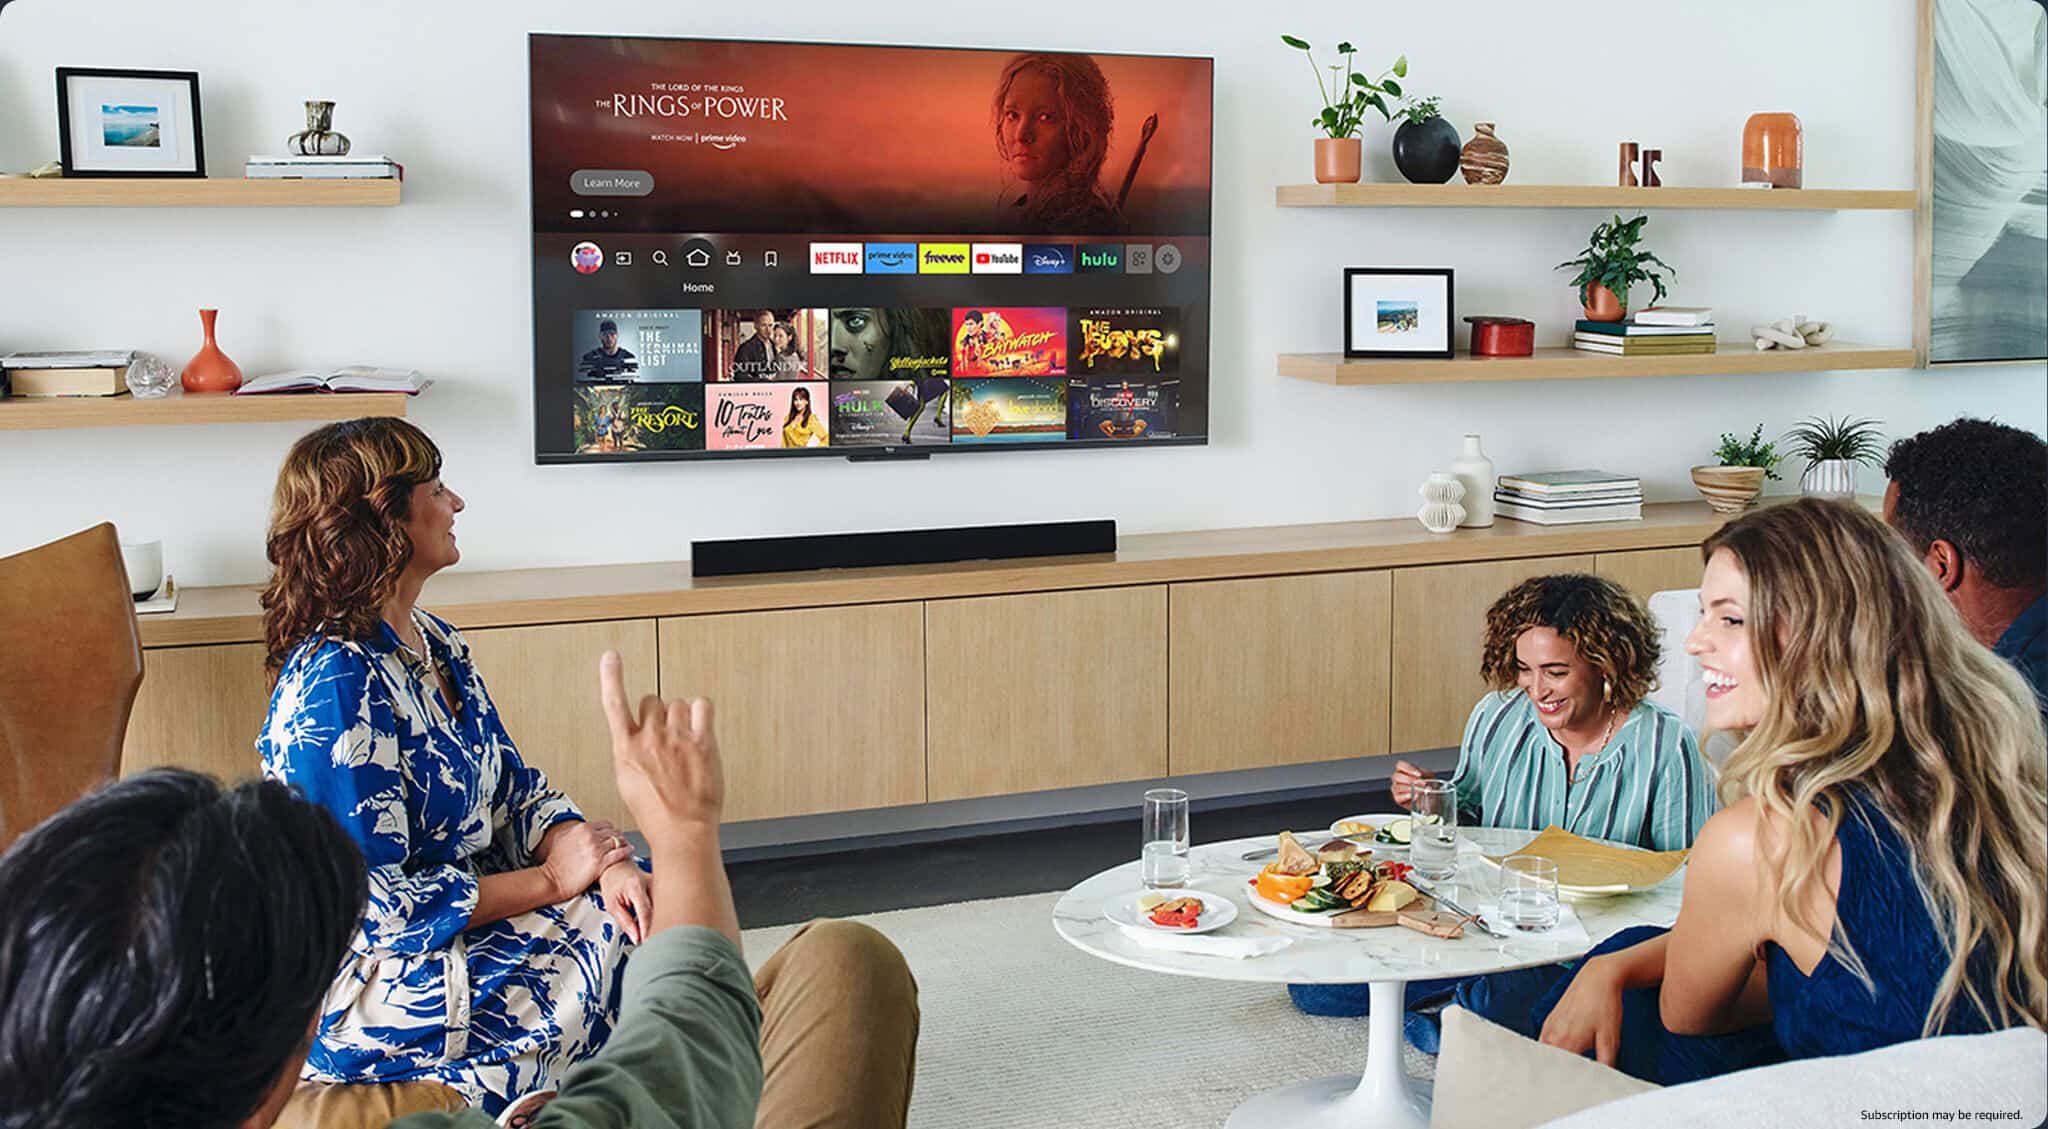 Amazon's Incredible 75-inch Omni QLED 4K Fire TV is on Sale for $999